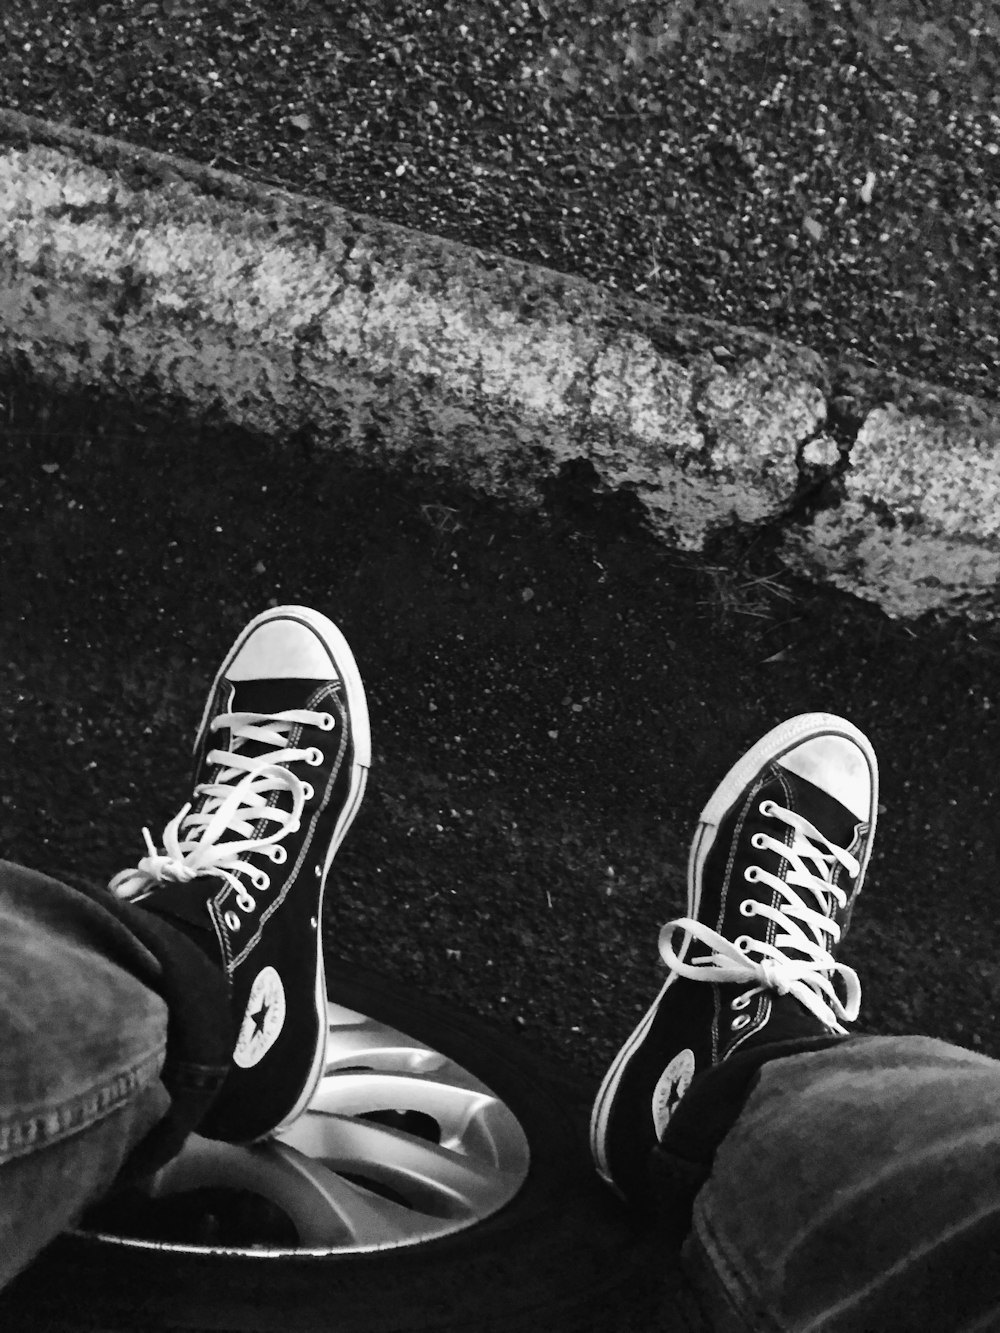 virkningsfuldhed Drama Banyan person wearing black and white converse all star high top sneakers photo –  Free Grey Image on Unsplash